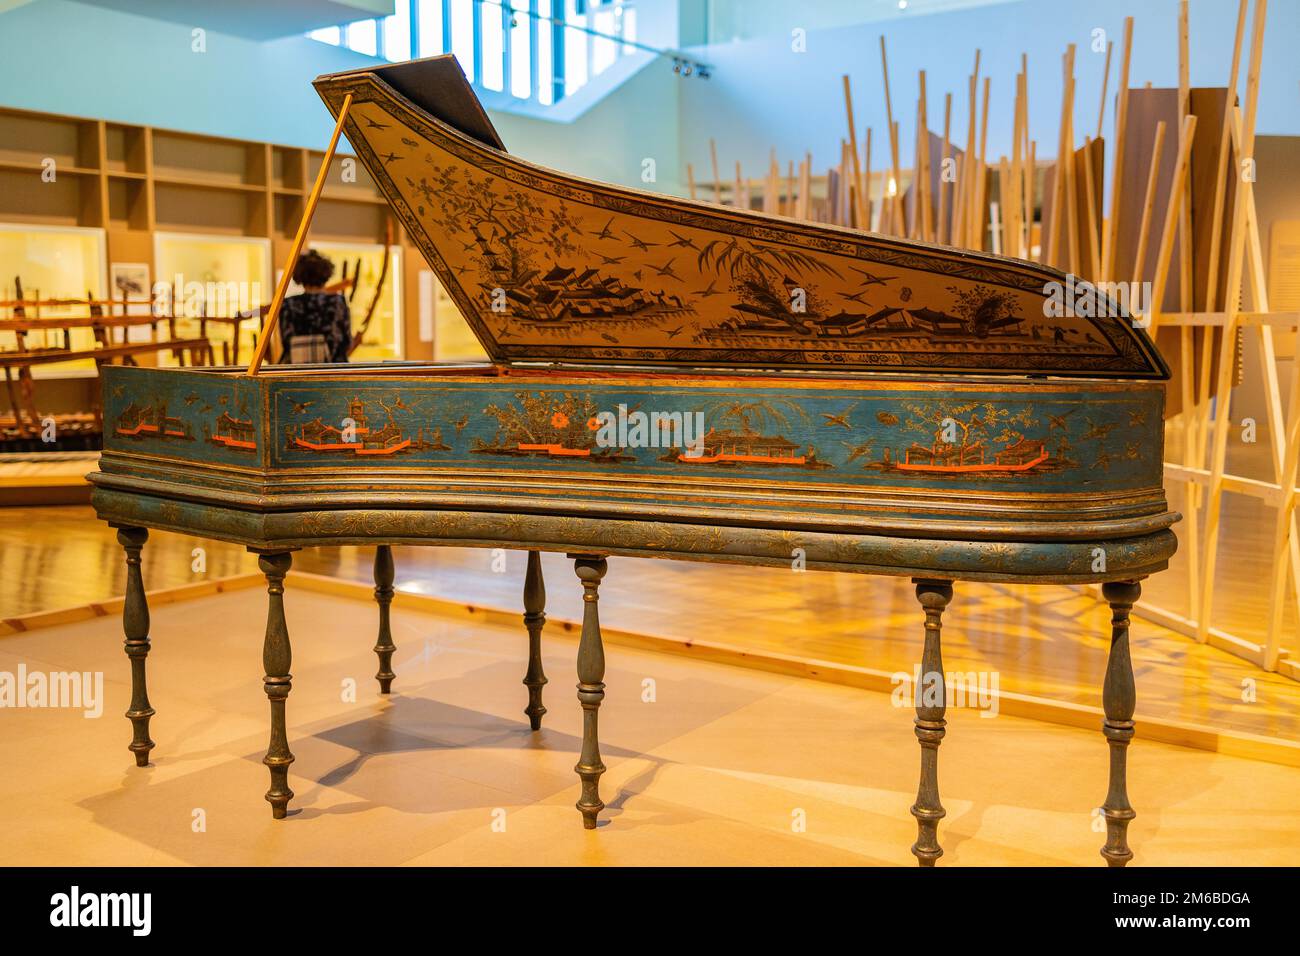 Close up of harpsichord from circa 1737 made by Christian Zell in Hamburg made from boxwood, ebony, red pine and maple Stock Photo